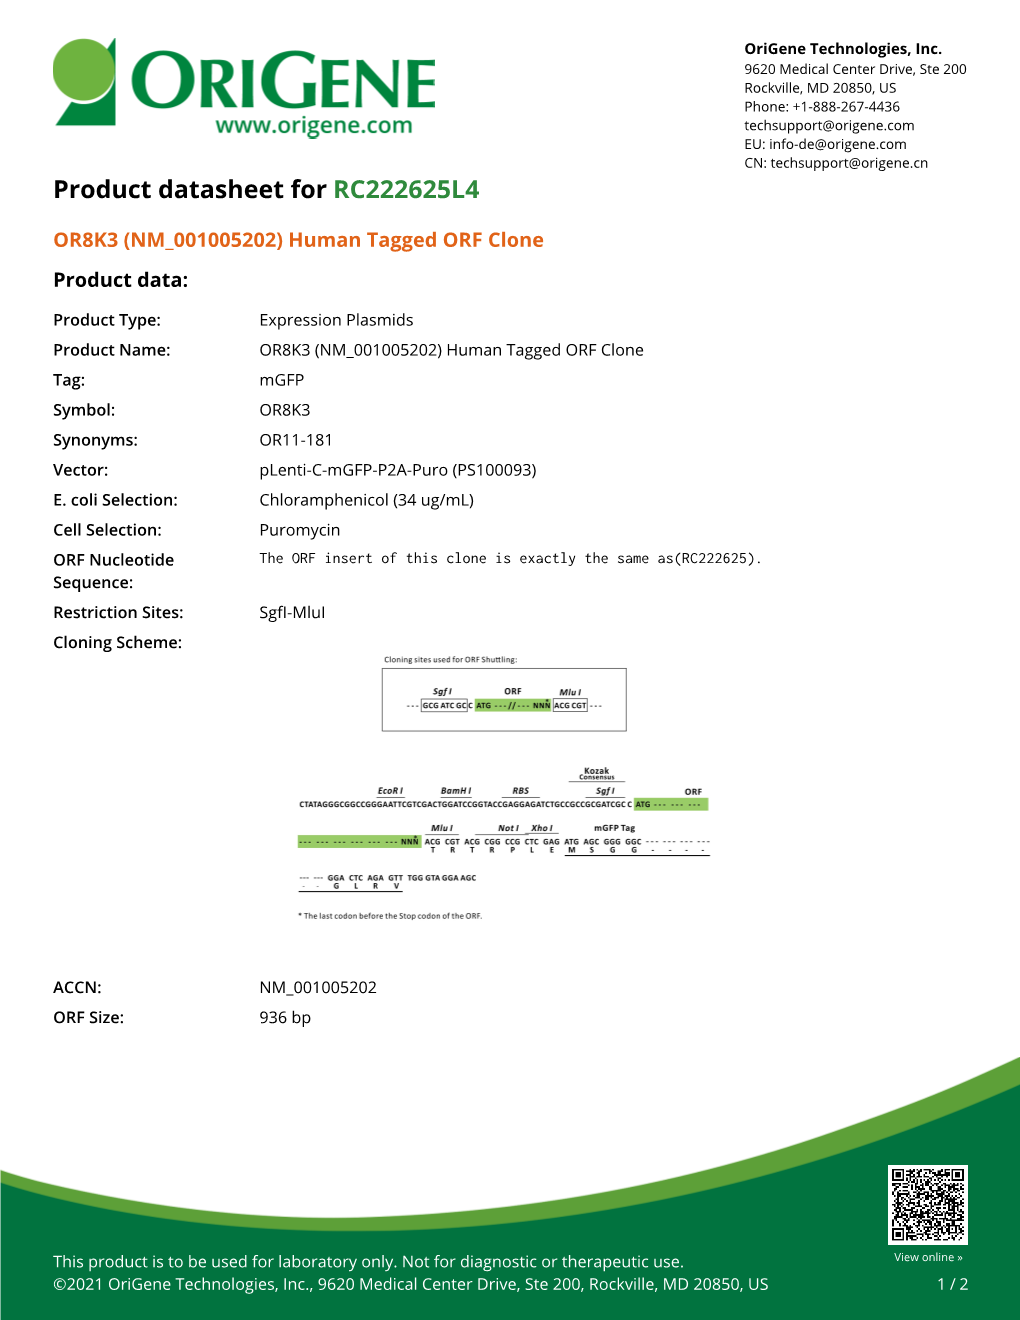 OR8K3 (NM 001005202) Human Tagged ORF Clone Product Data